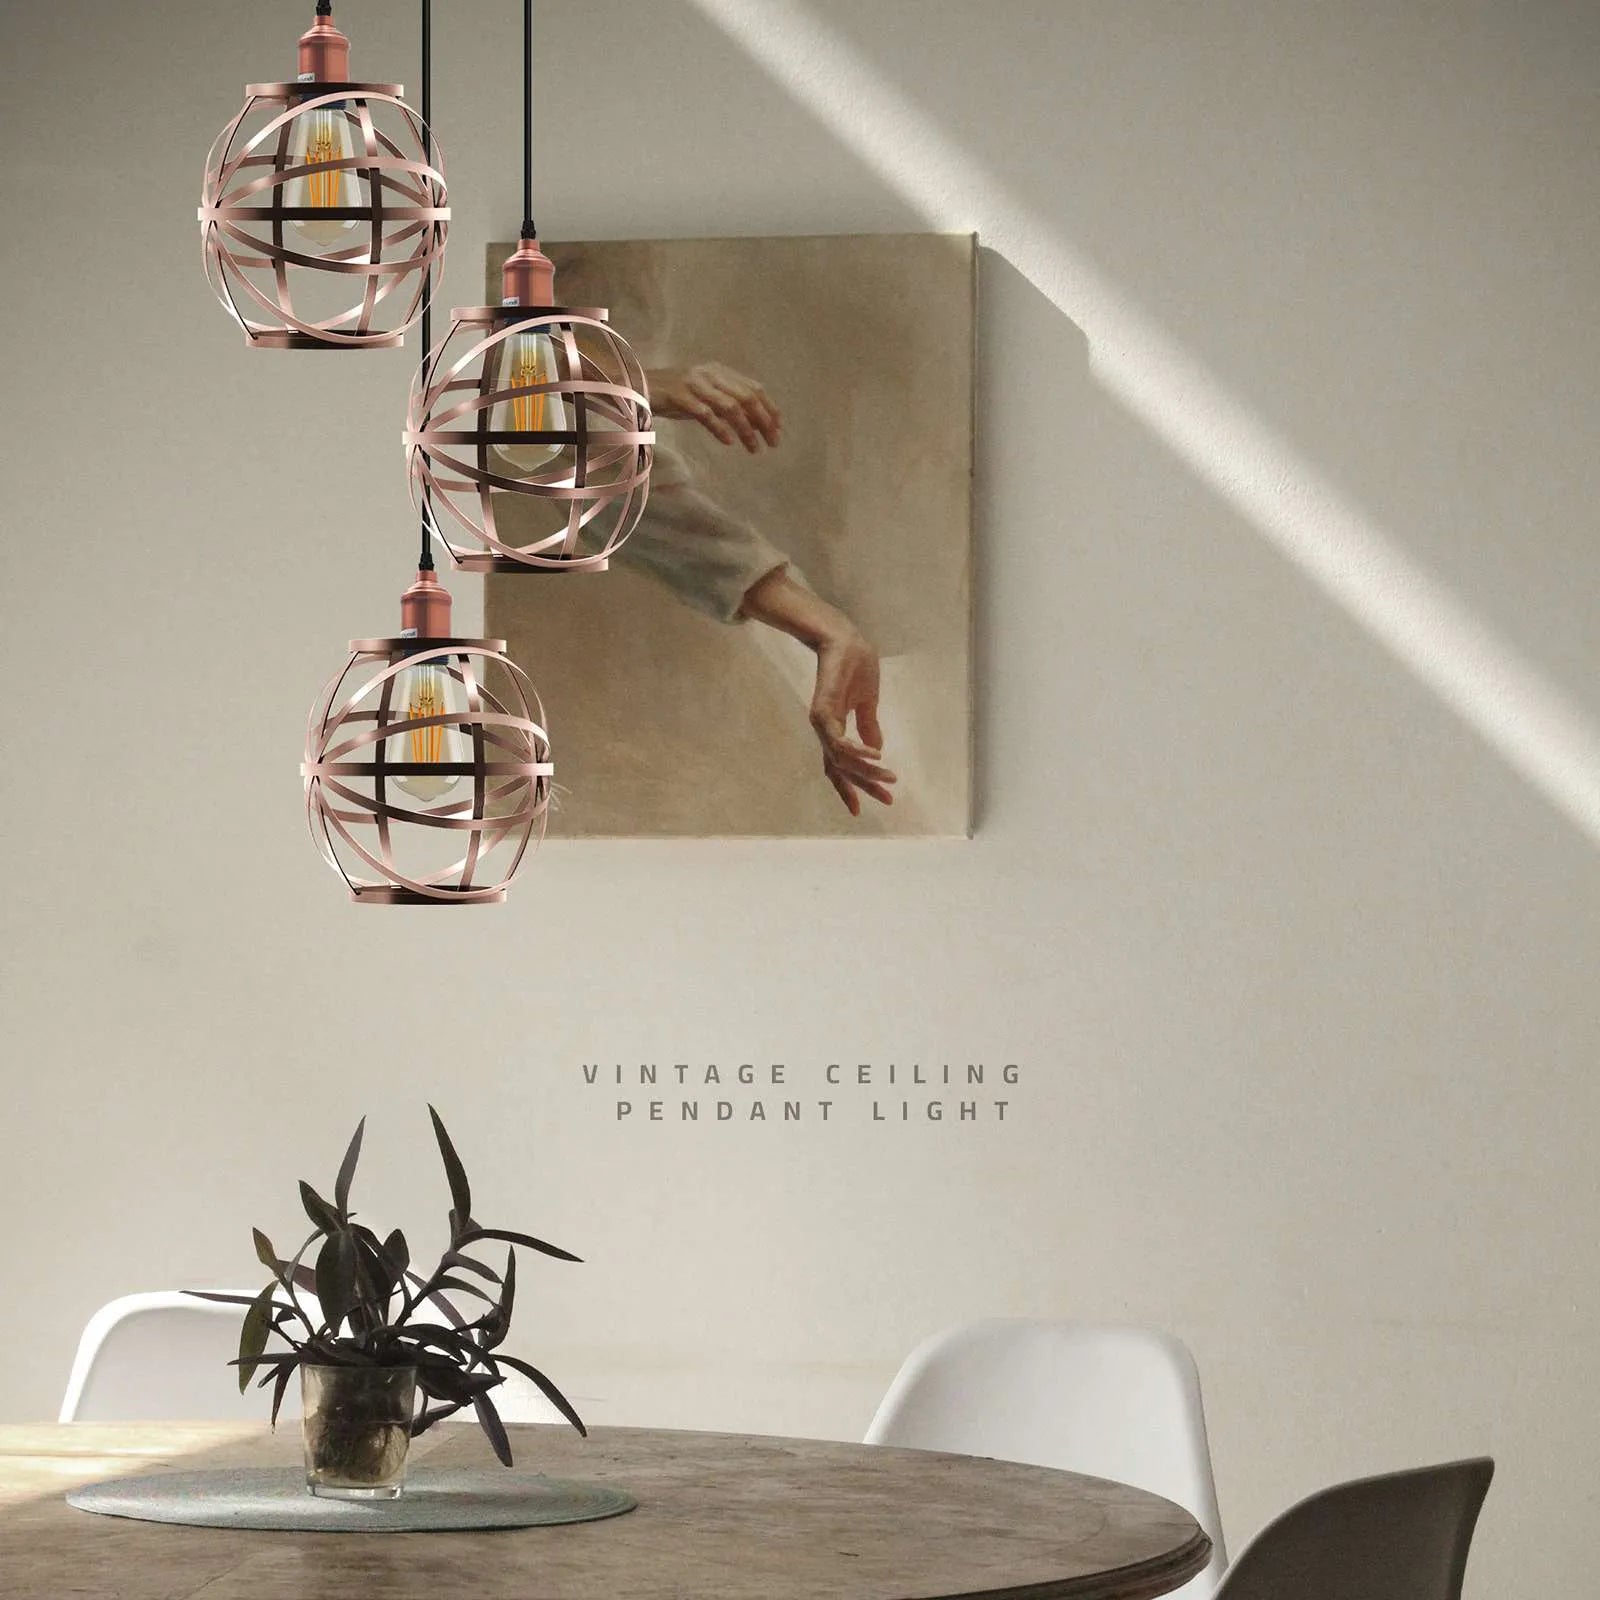 3 Head Wire Cage Hanging Pendant Light.application image